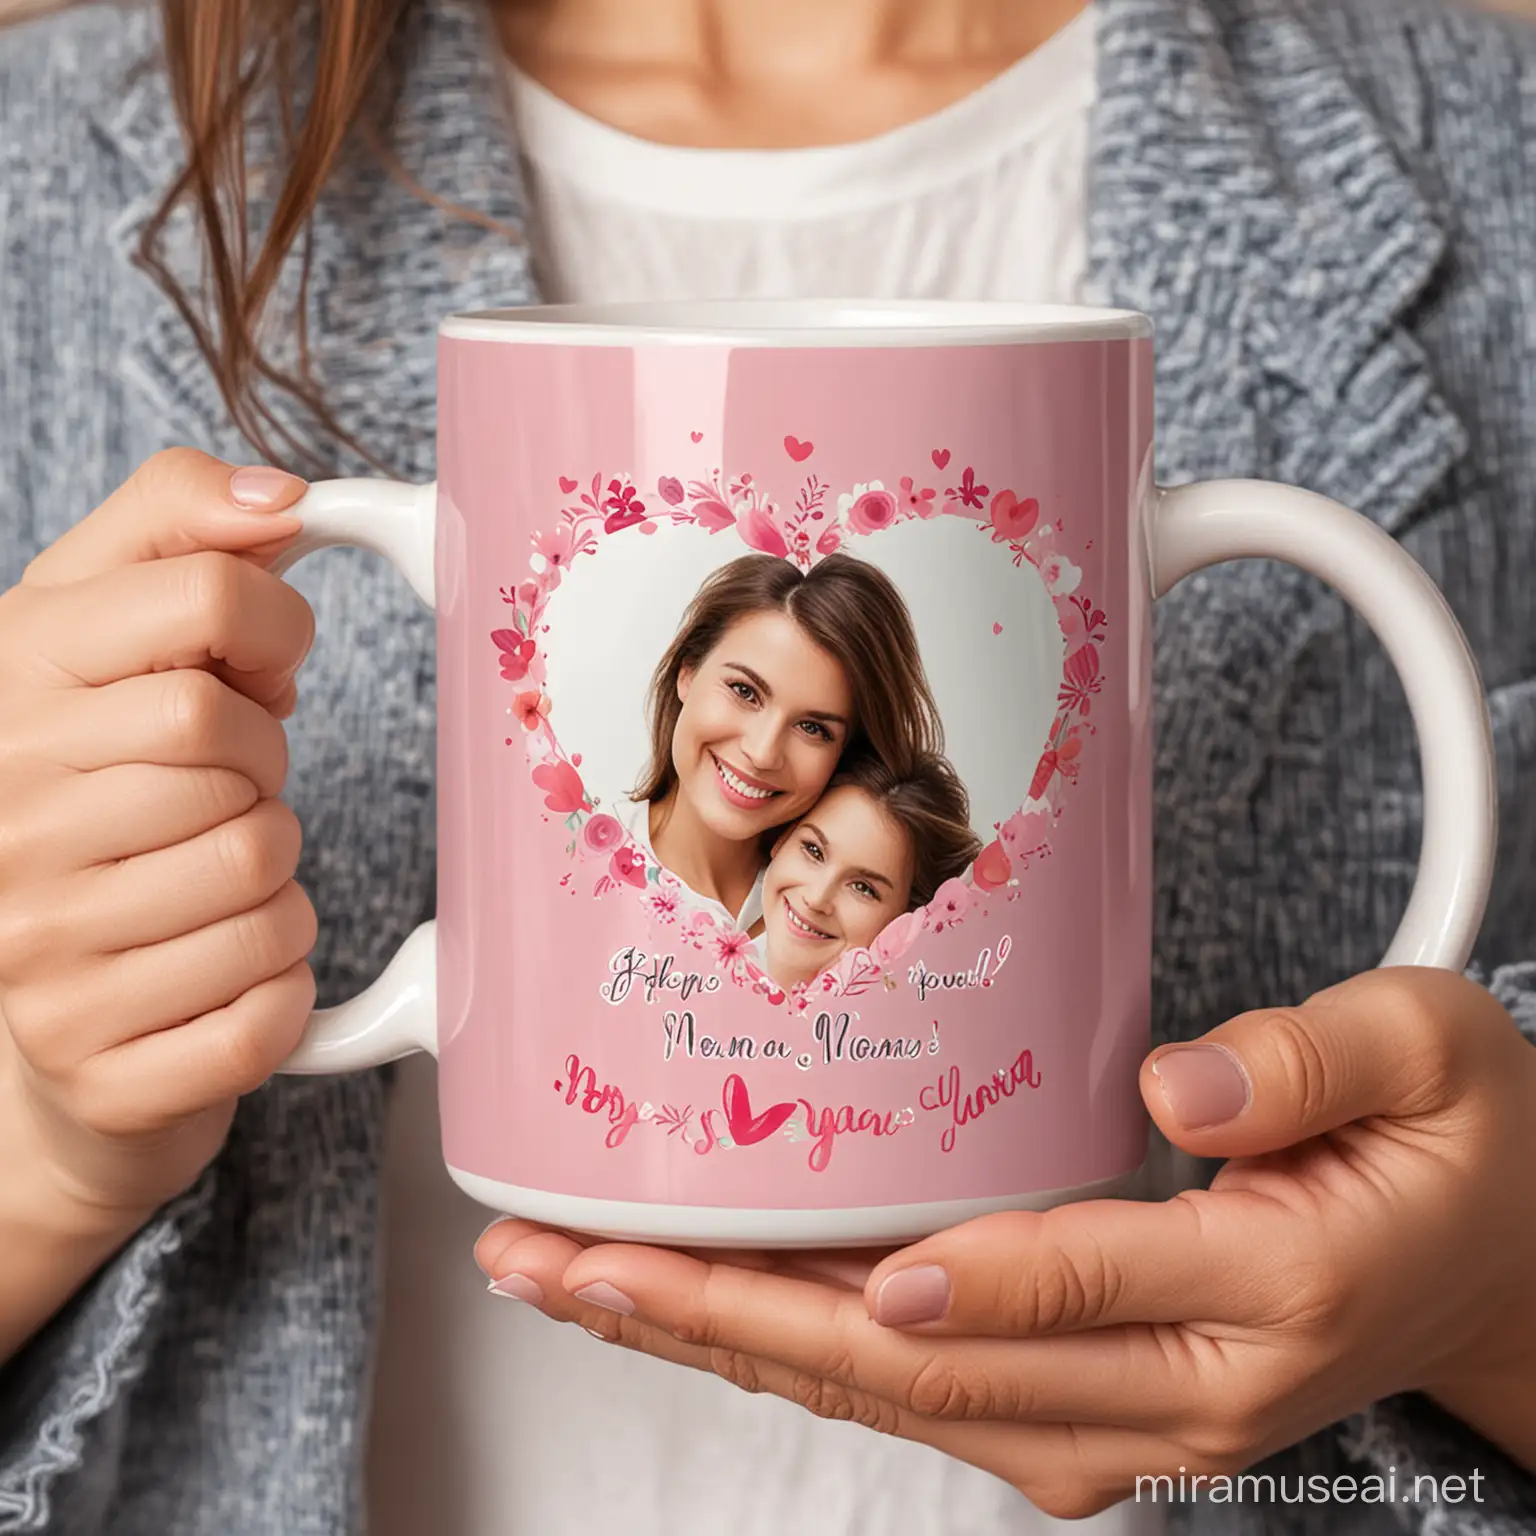 generate something beautiful for mothers day event put image on mug with message I Love You Mom